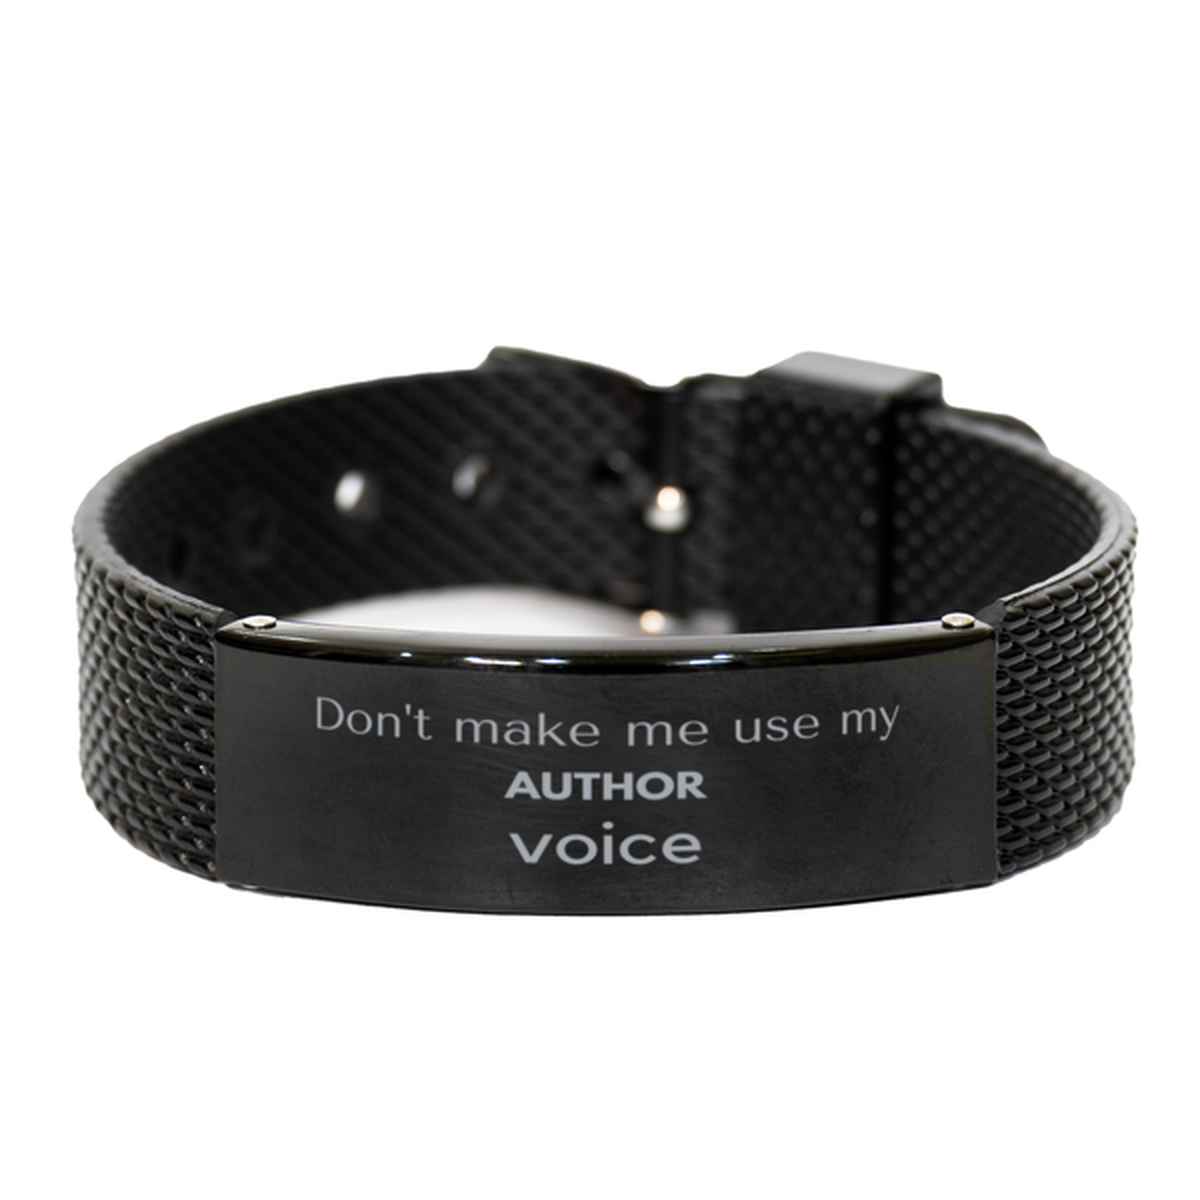 Don't make me use my Author voice, Sarcasm Author Gifts, Christmas Author Black Shark Mesh Bracelet Birthday Unique Gifts For Author Coworkers, Men, Women, Colleague, Friends